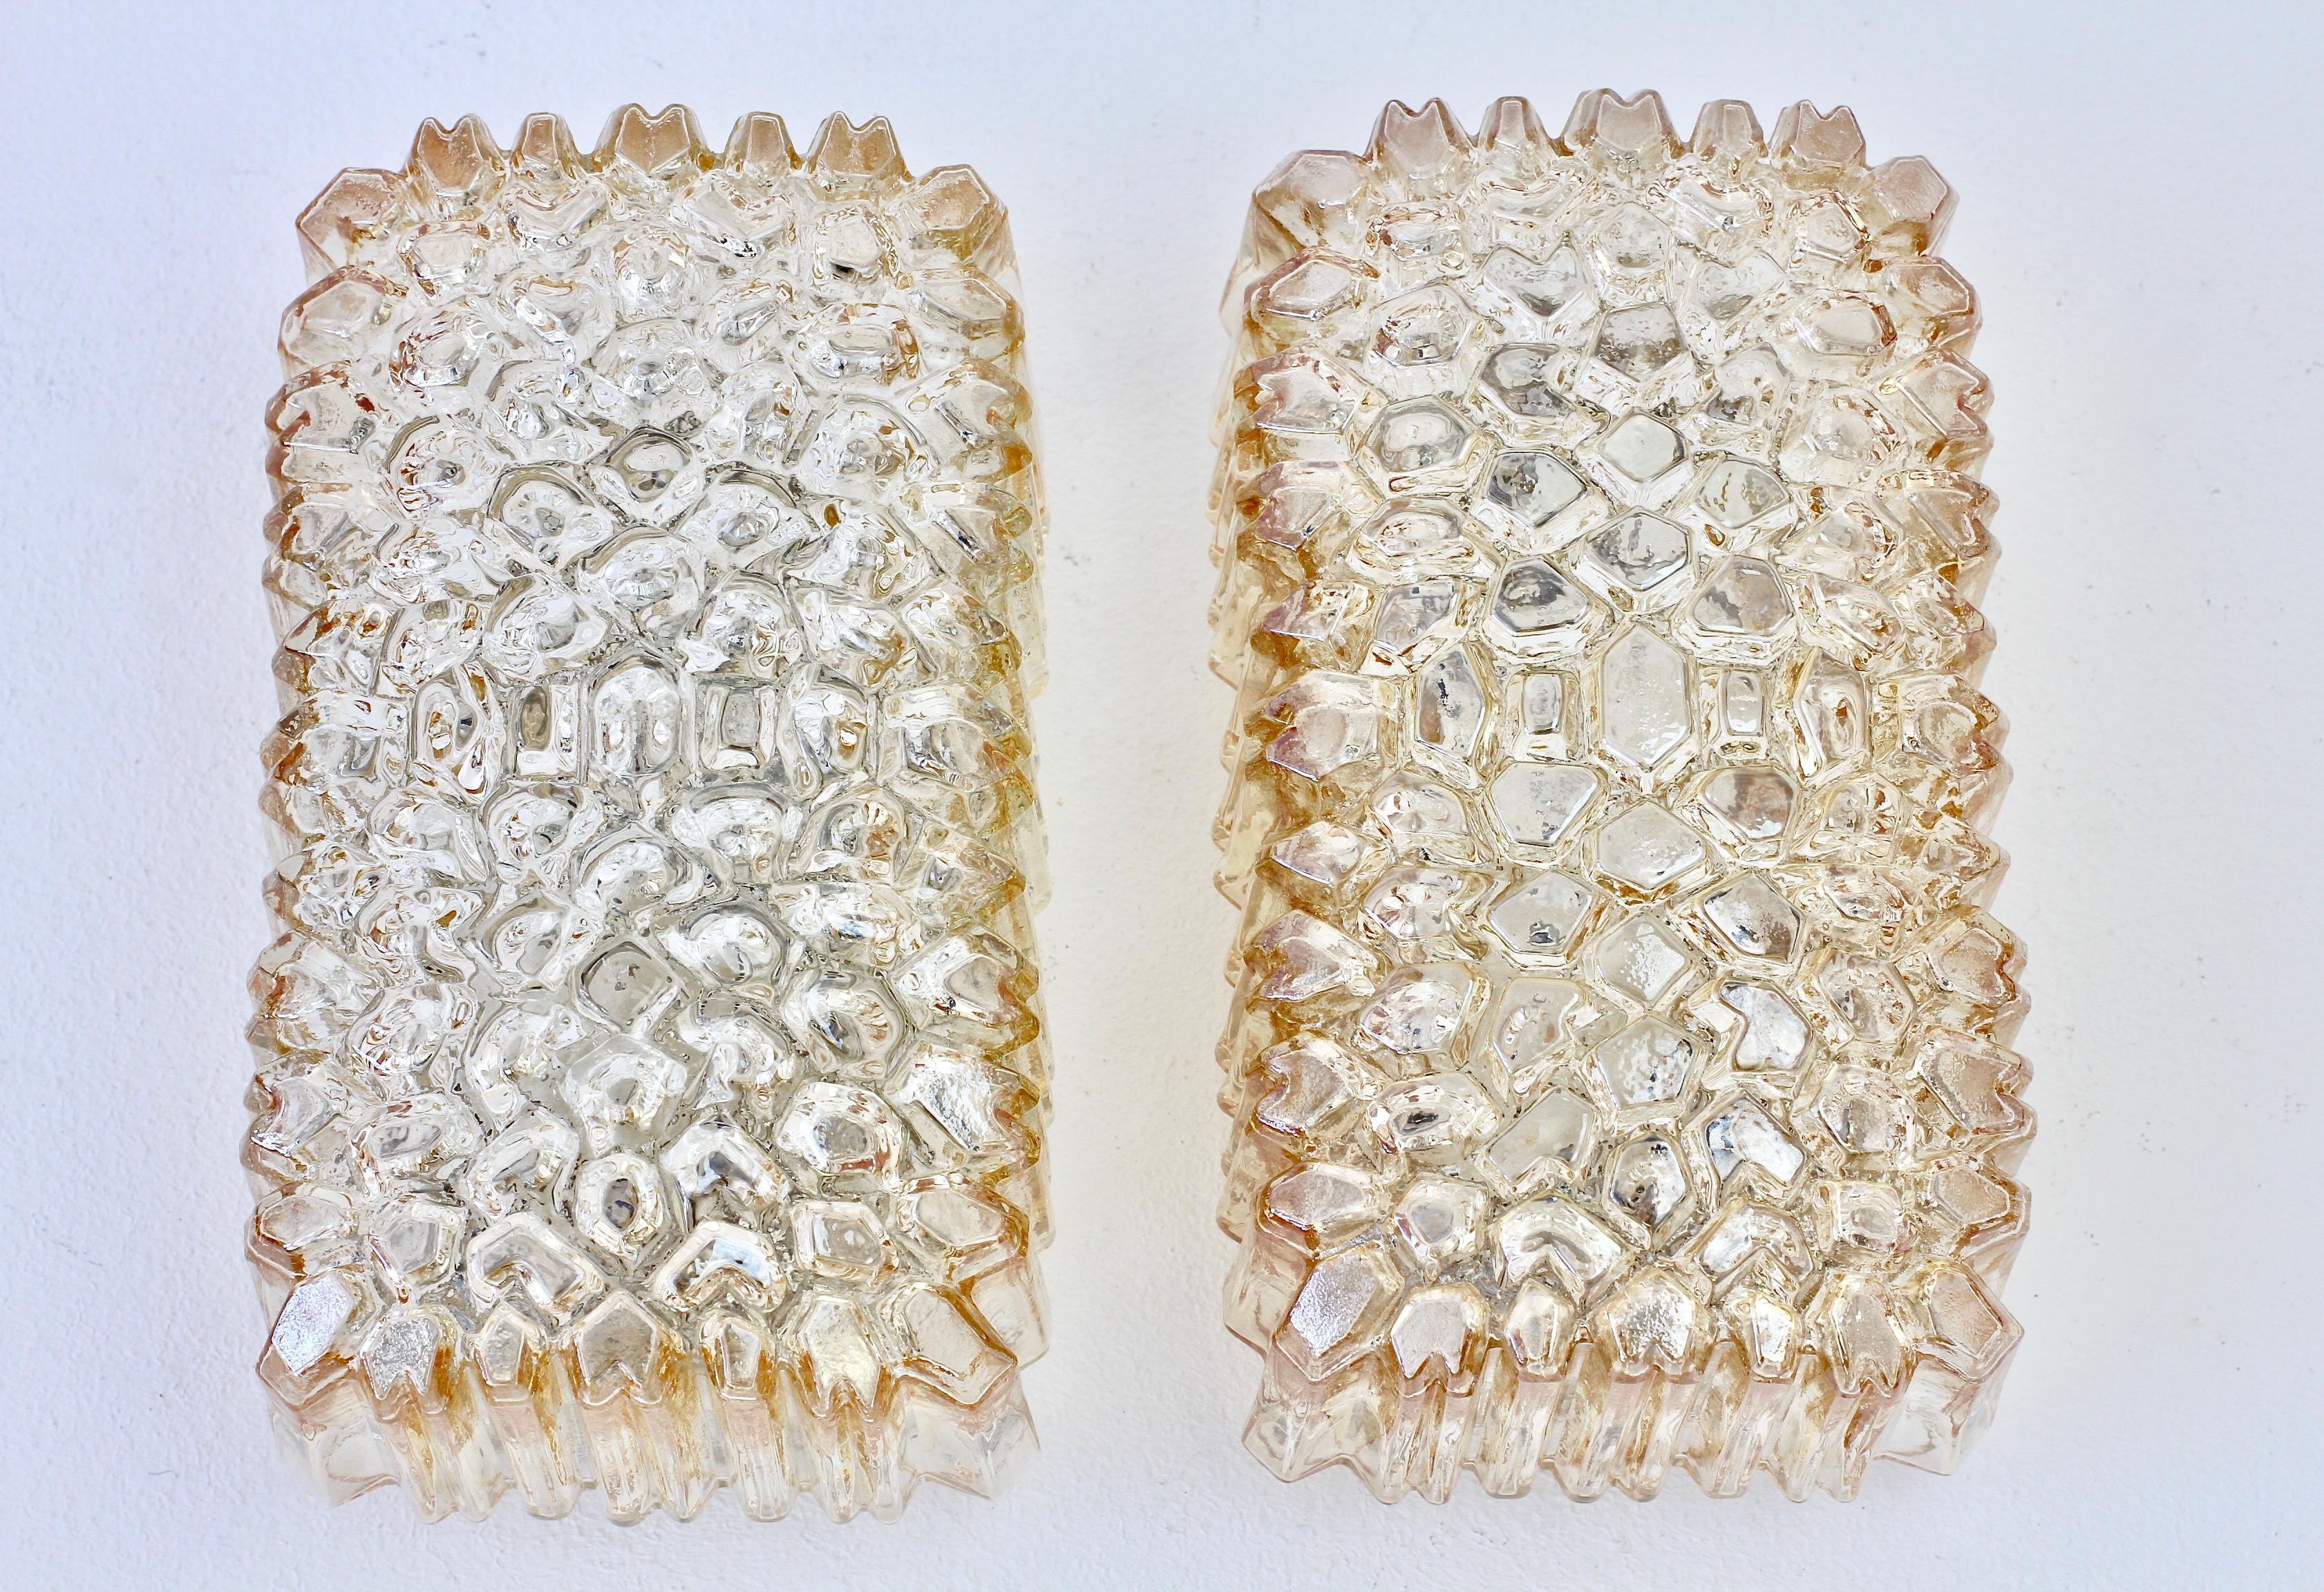 Metal Limburg Pair of Wall Lights 1970s Organic Textured Amber Toned Ice Glass Sconces